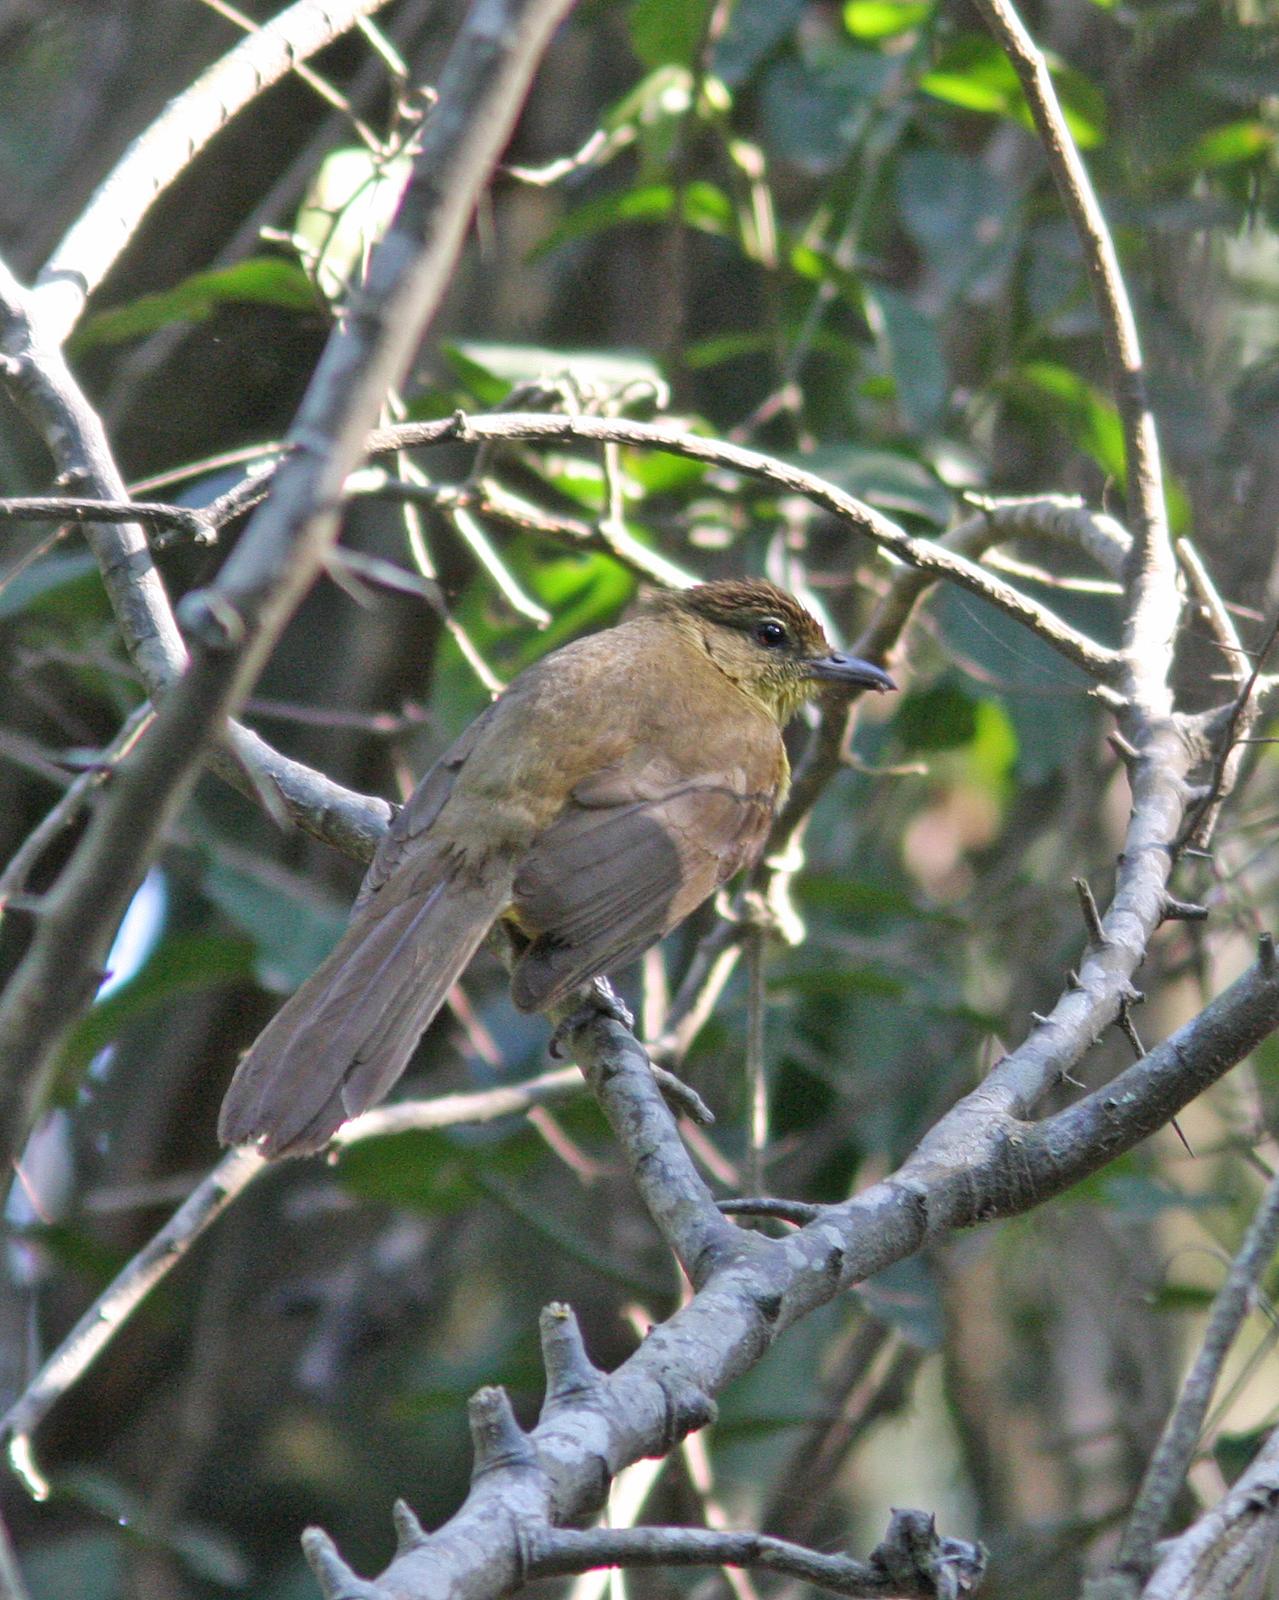 Yellow-bellied Greenbul Photo by Henk Baptist